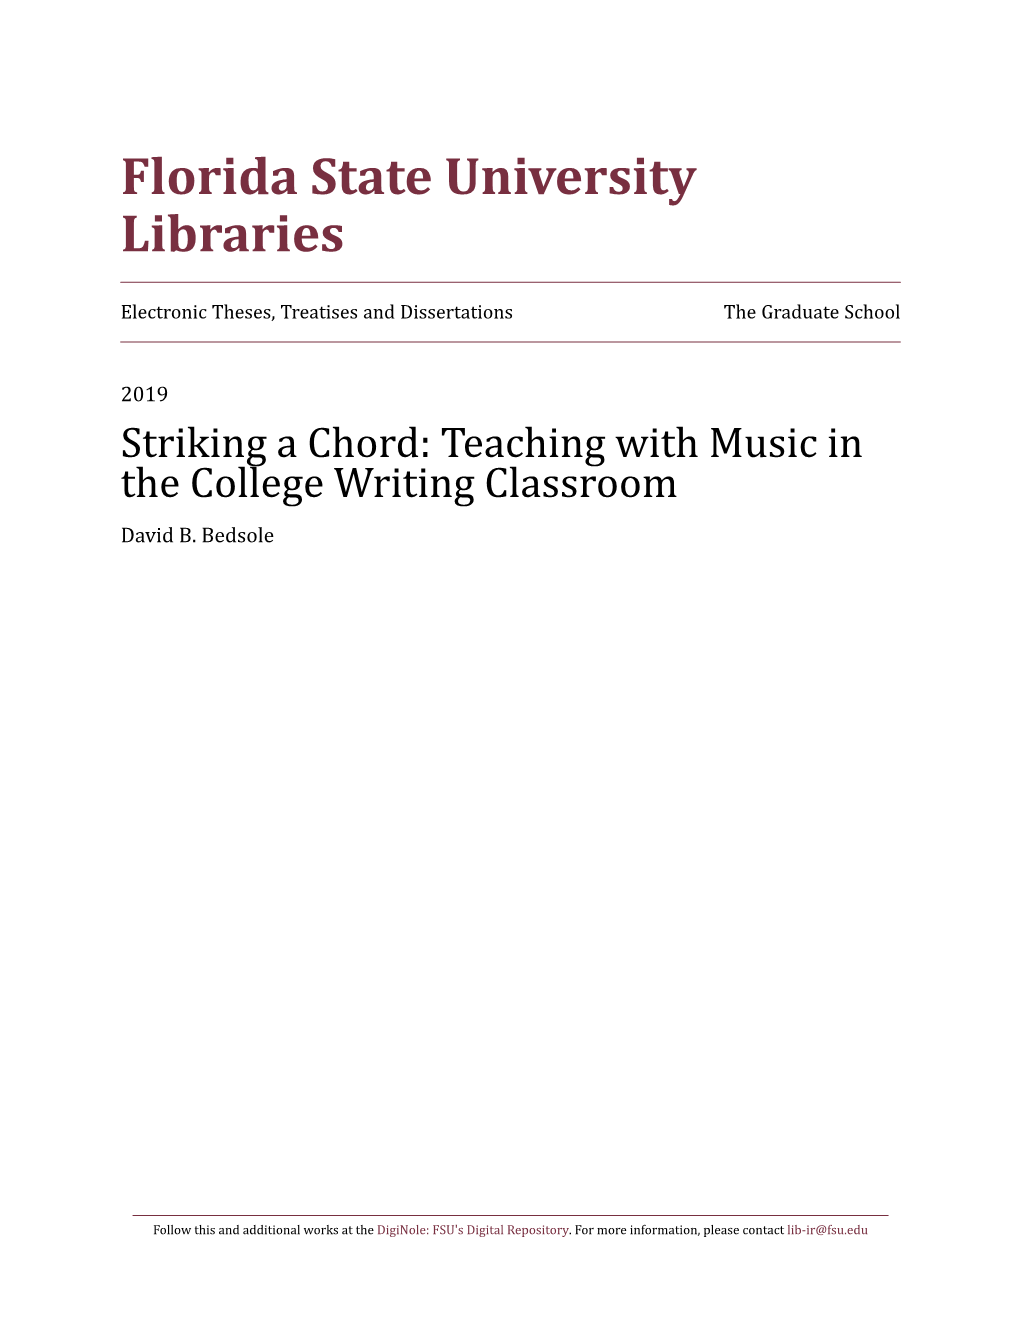 Teaching with Music in the College Writing Classroom